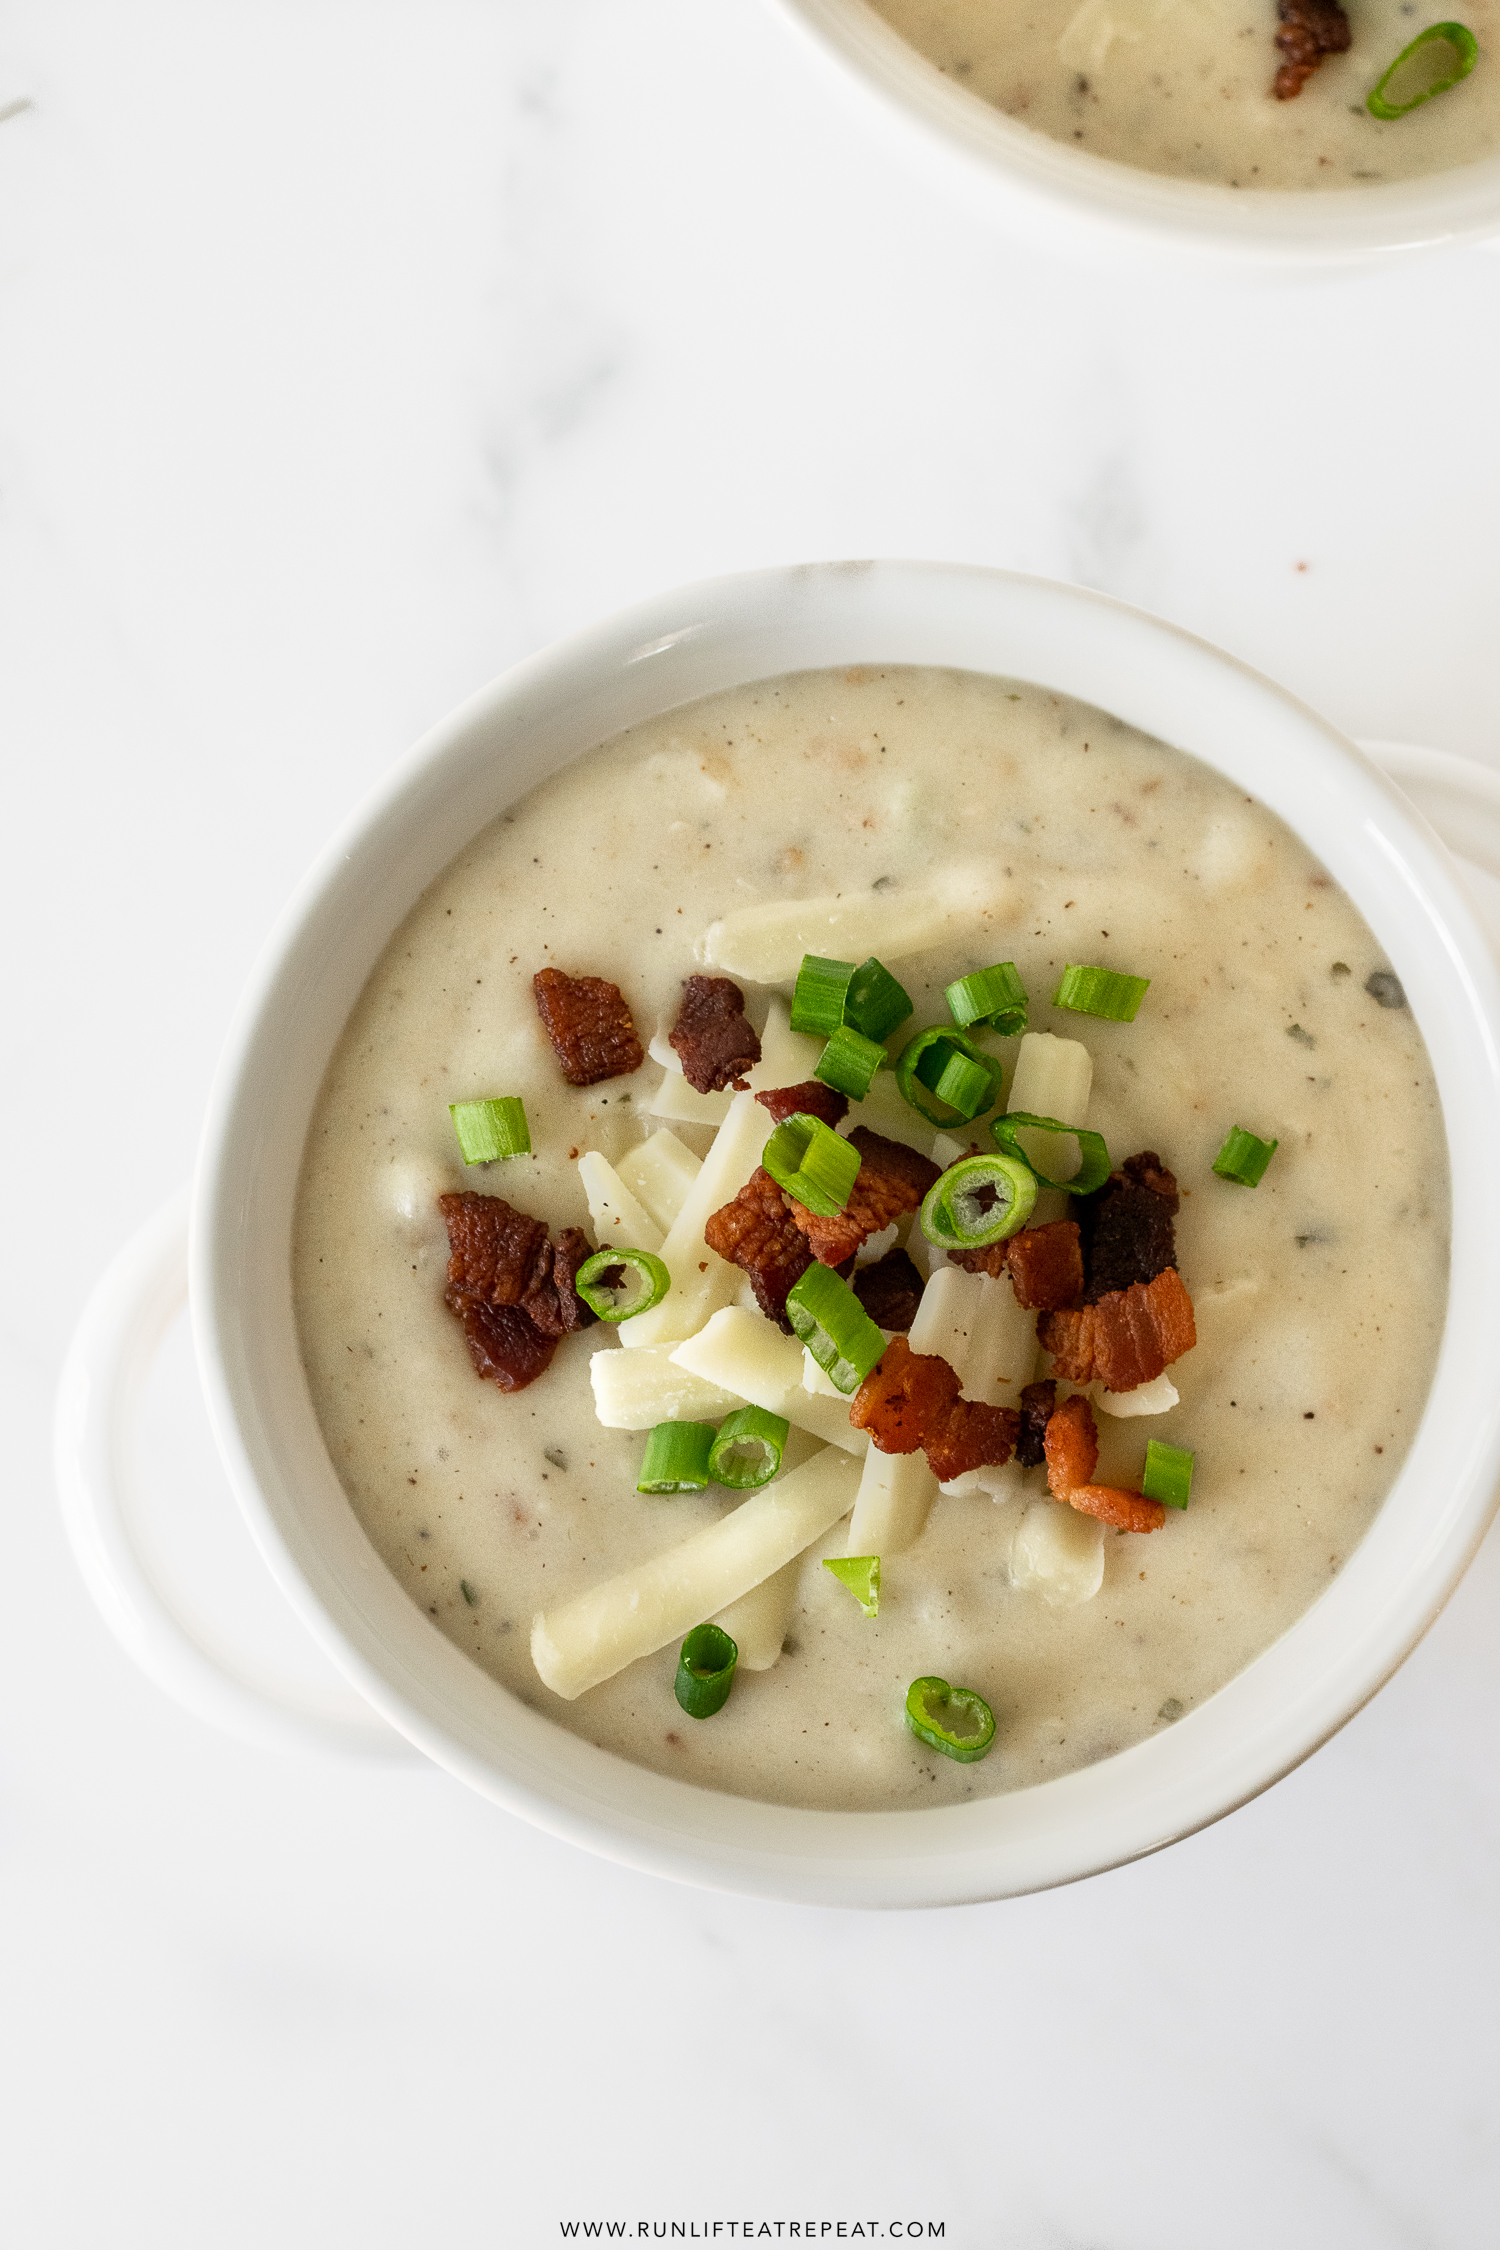 There's nothing better than enjoying a warm bowl of creamy loaded baked potato soup on a cold night – comfort food at its best! This recipe takes a classic soup to the next level. It's made with simple ingredients, packed with flavor, comes together easily in one pan and is done in 40 minutes!